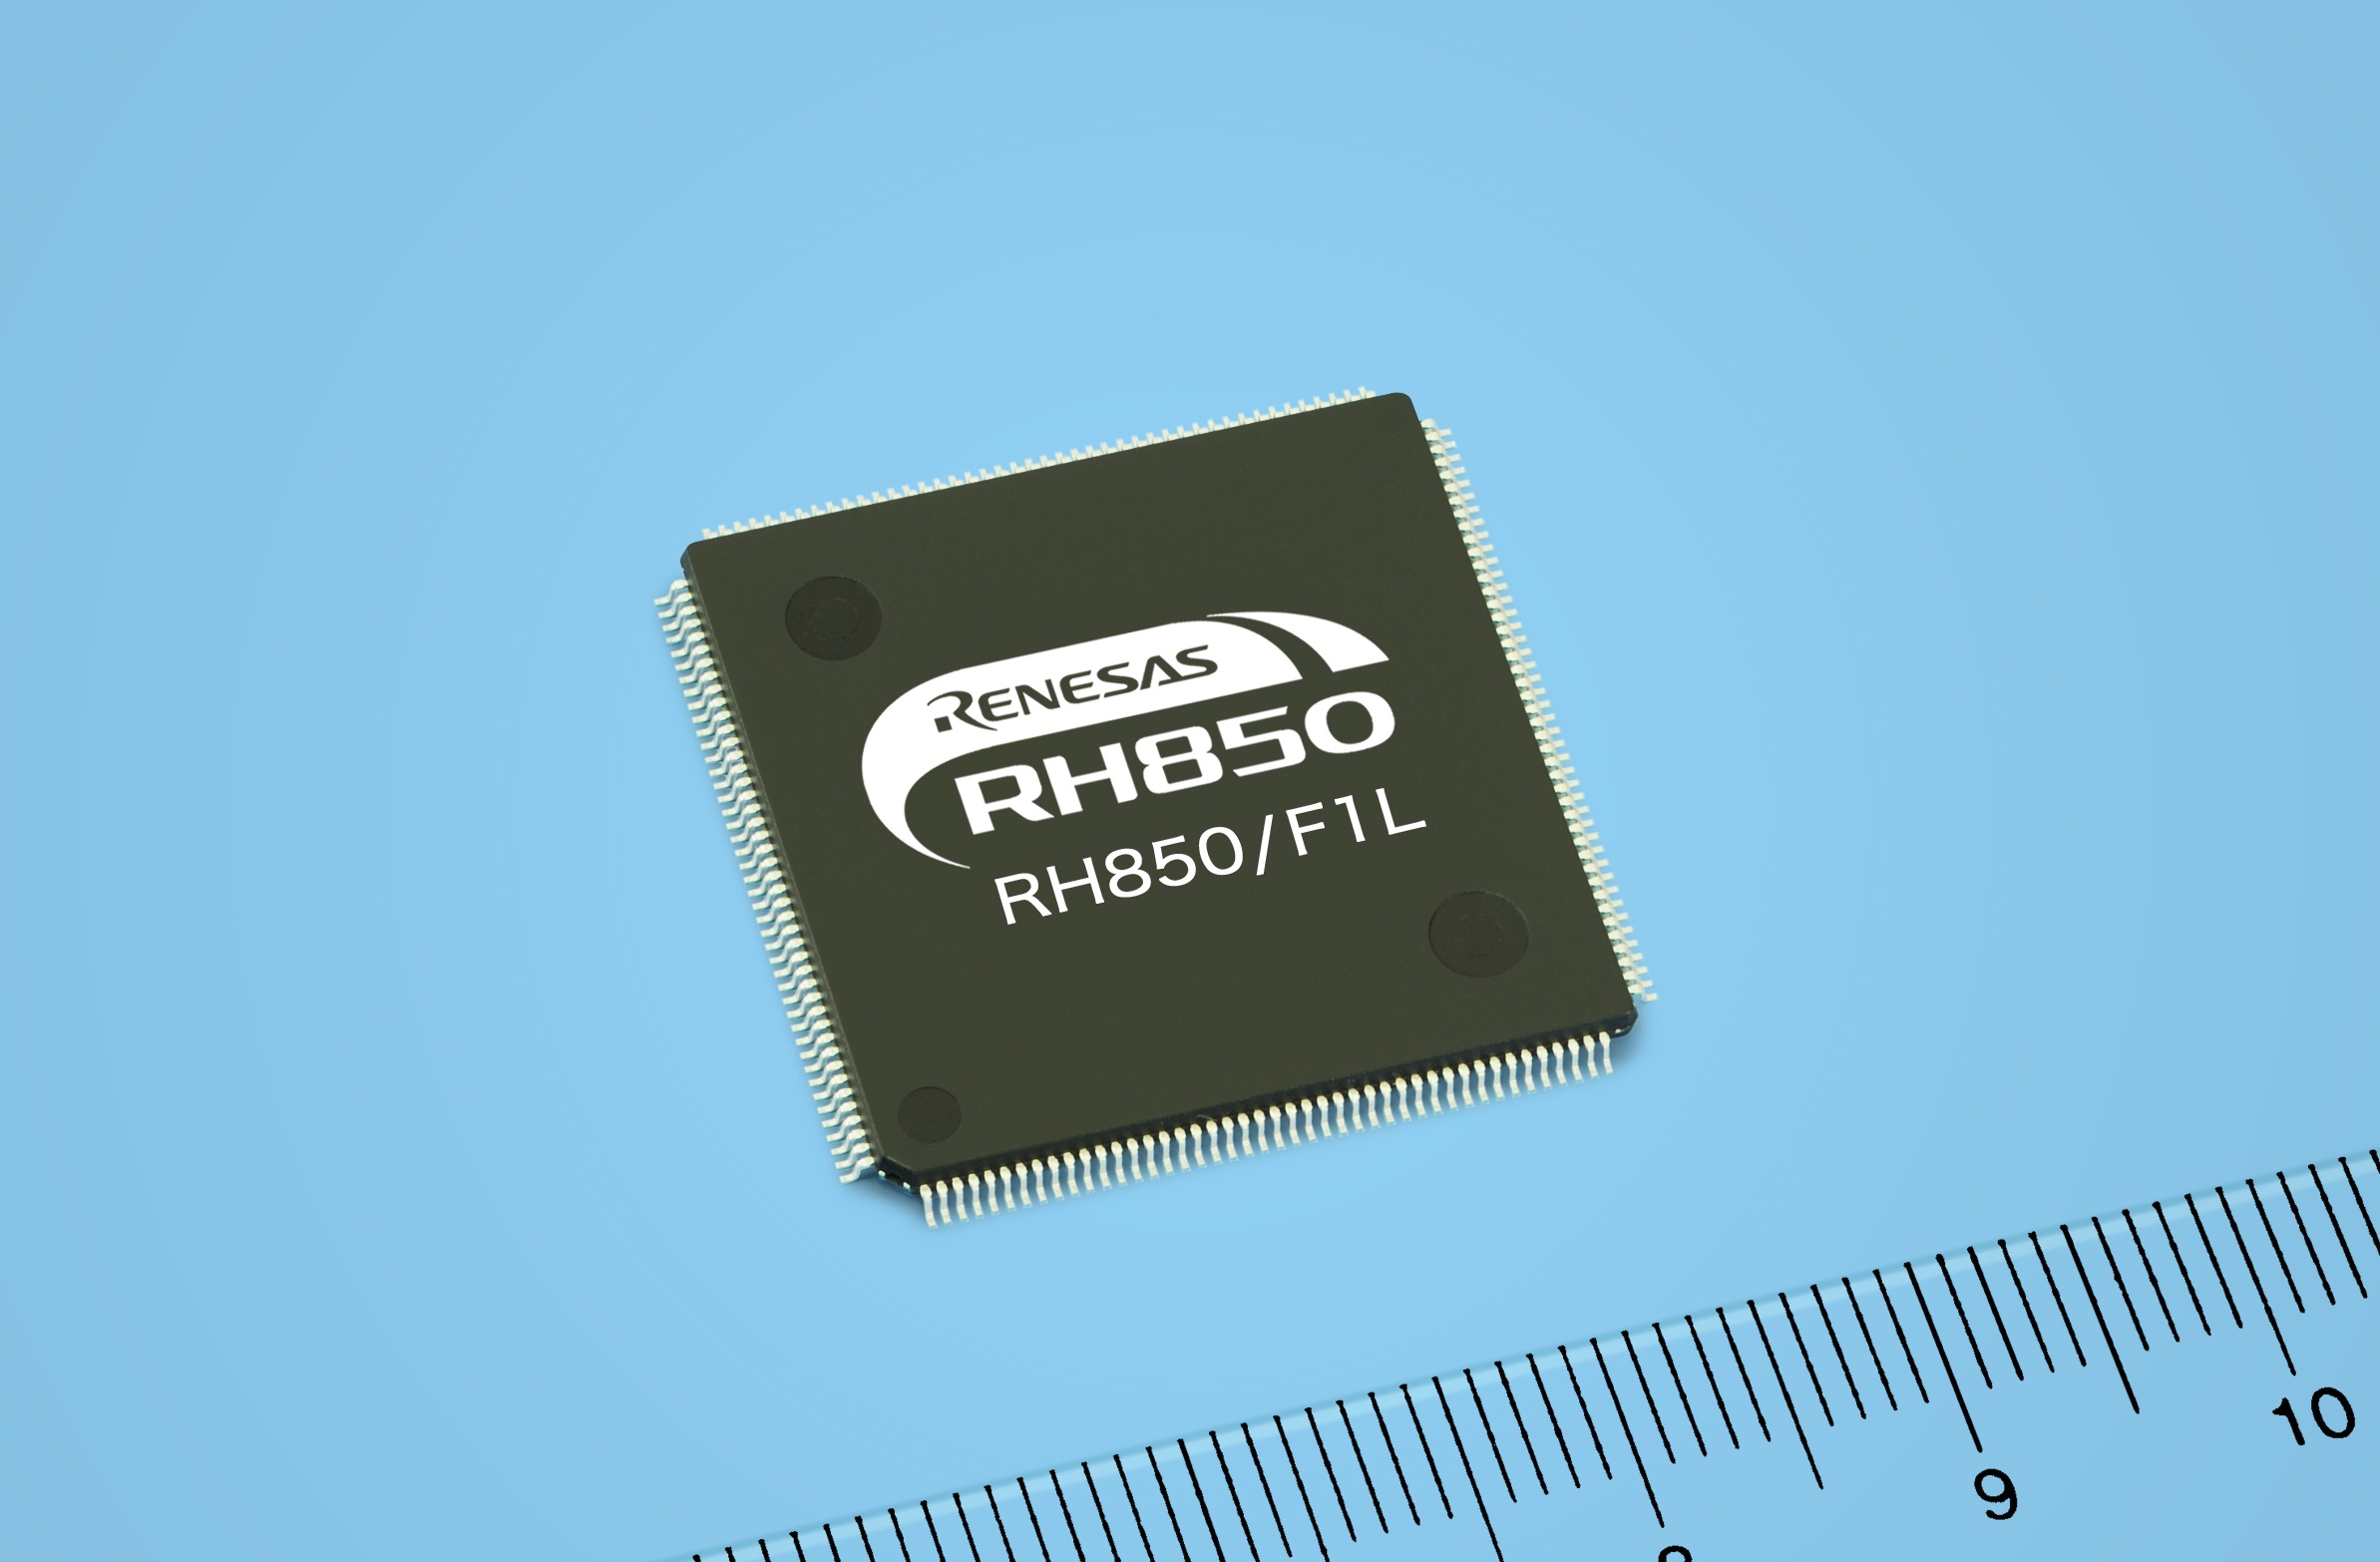 New Renesas Ultra Low Power Consumption Mcus To Be Used In Variety Of Auto Applications